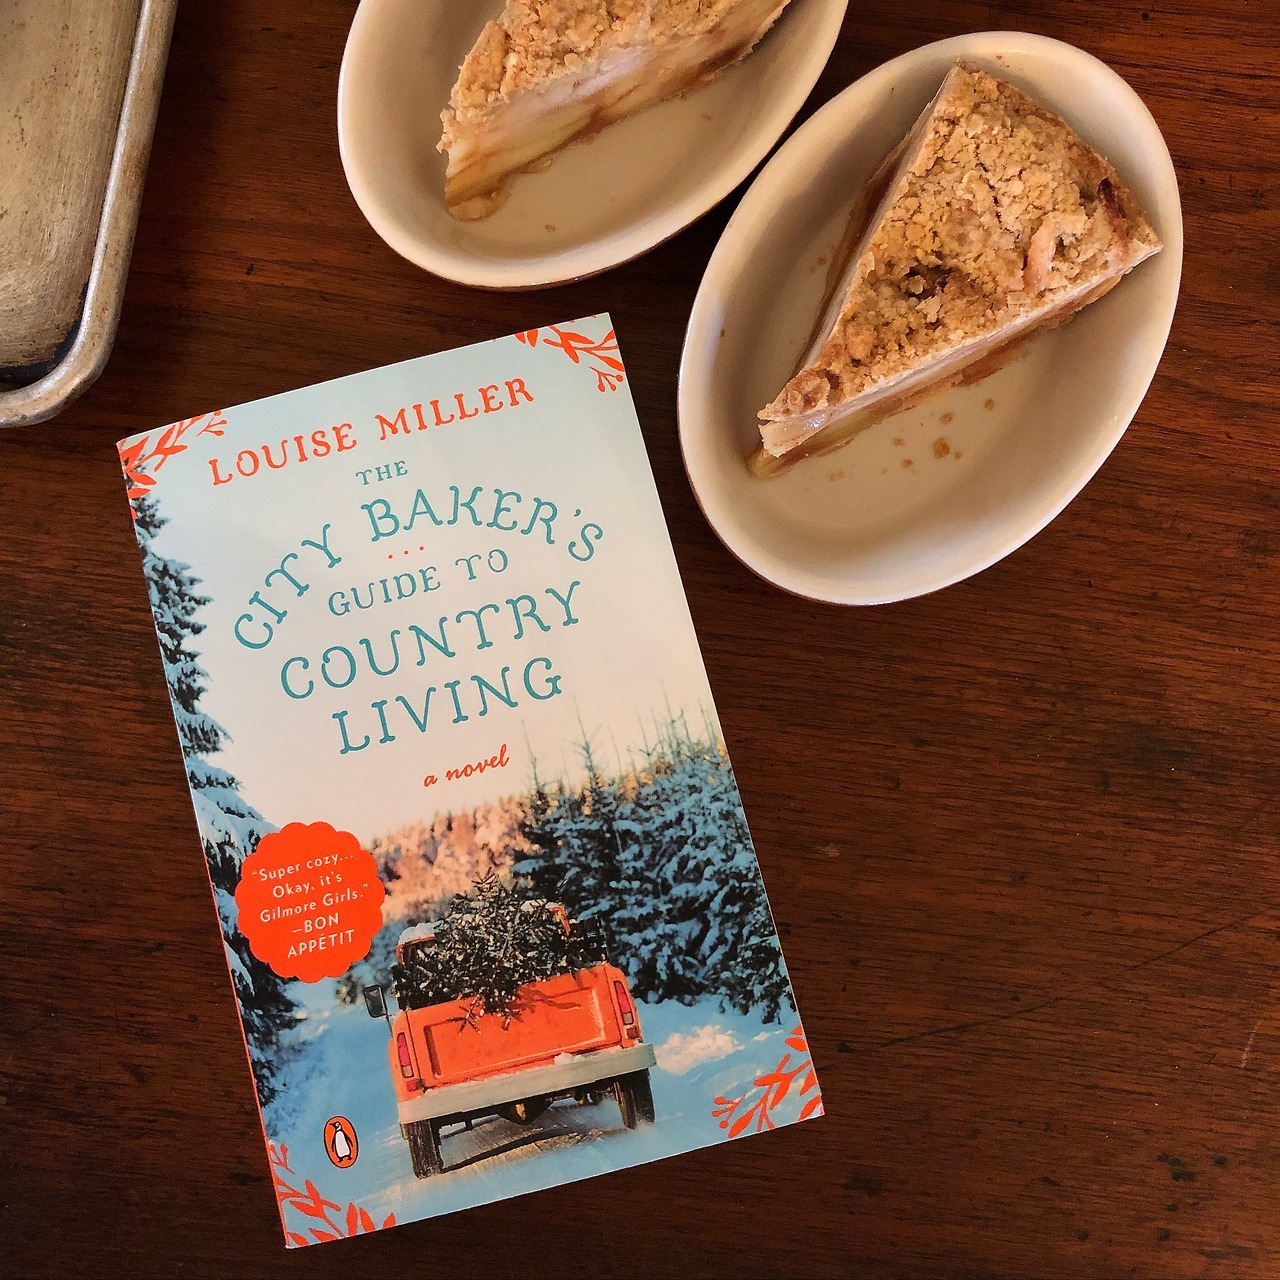 The City Baker's Guide to Country Living by Louise Miller: 9781101981214 |  : Books